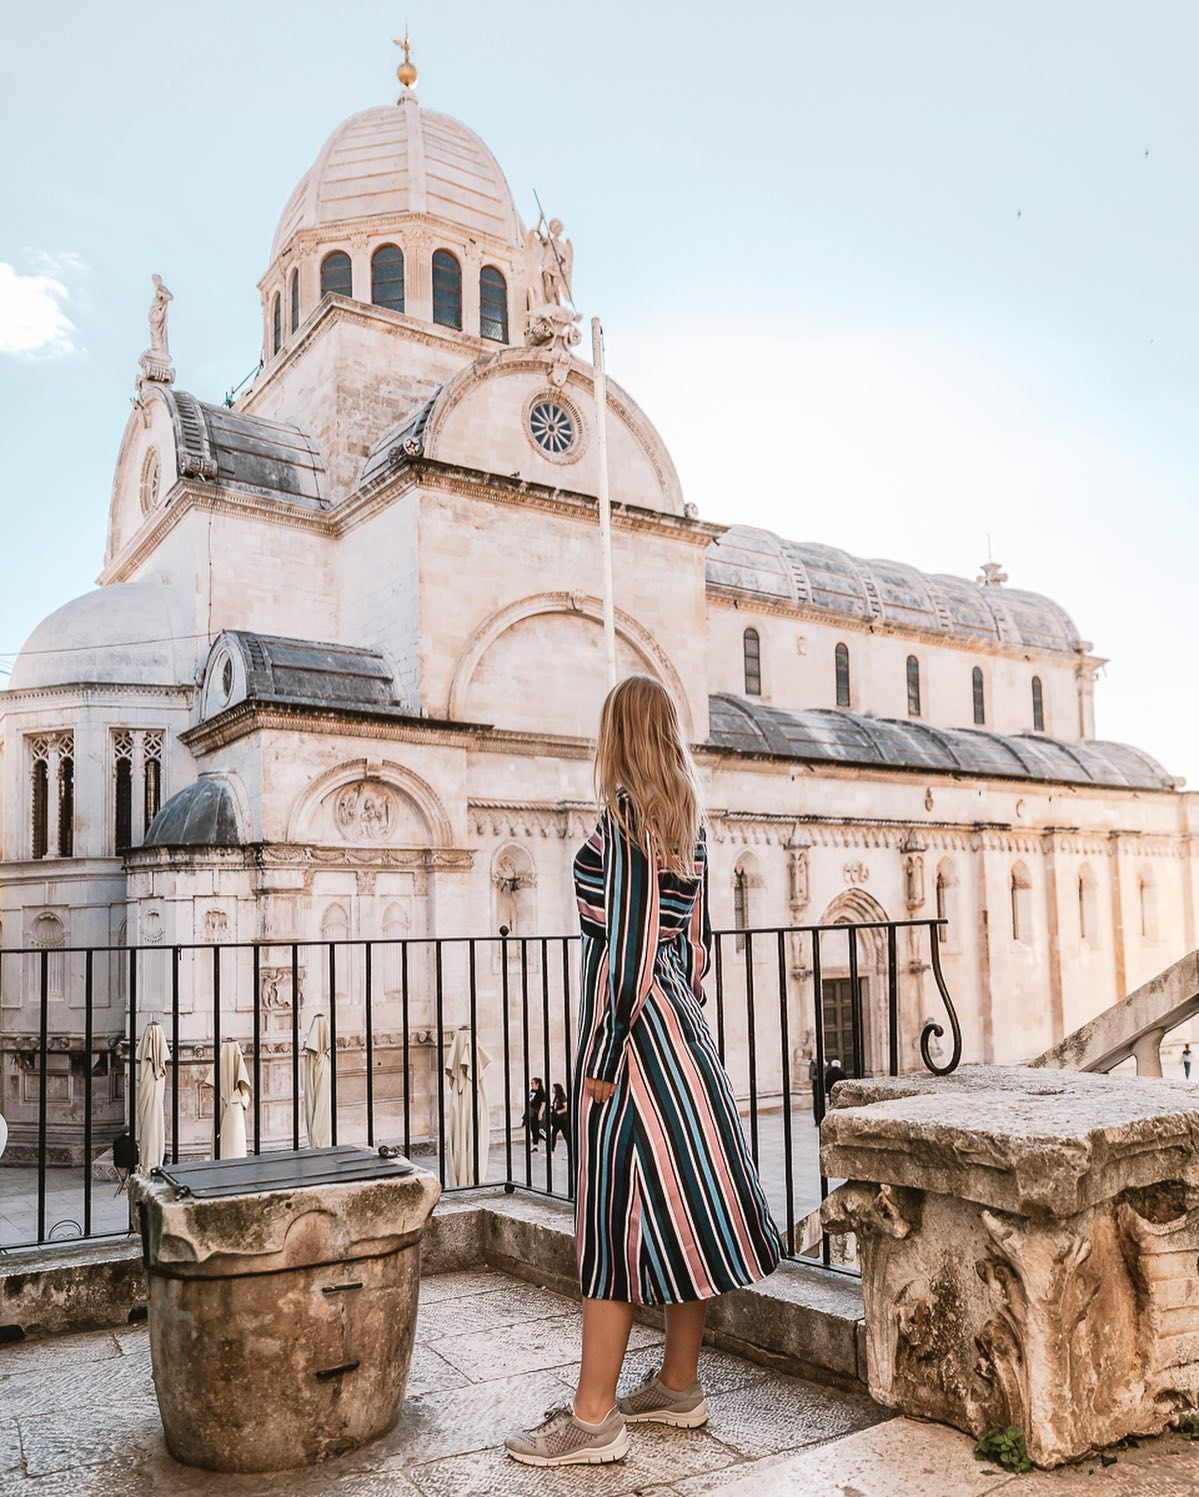 Sibenik Cathedral, one of the most instagrammable places in Croatia